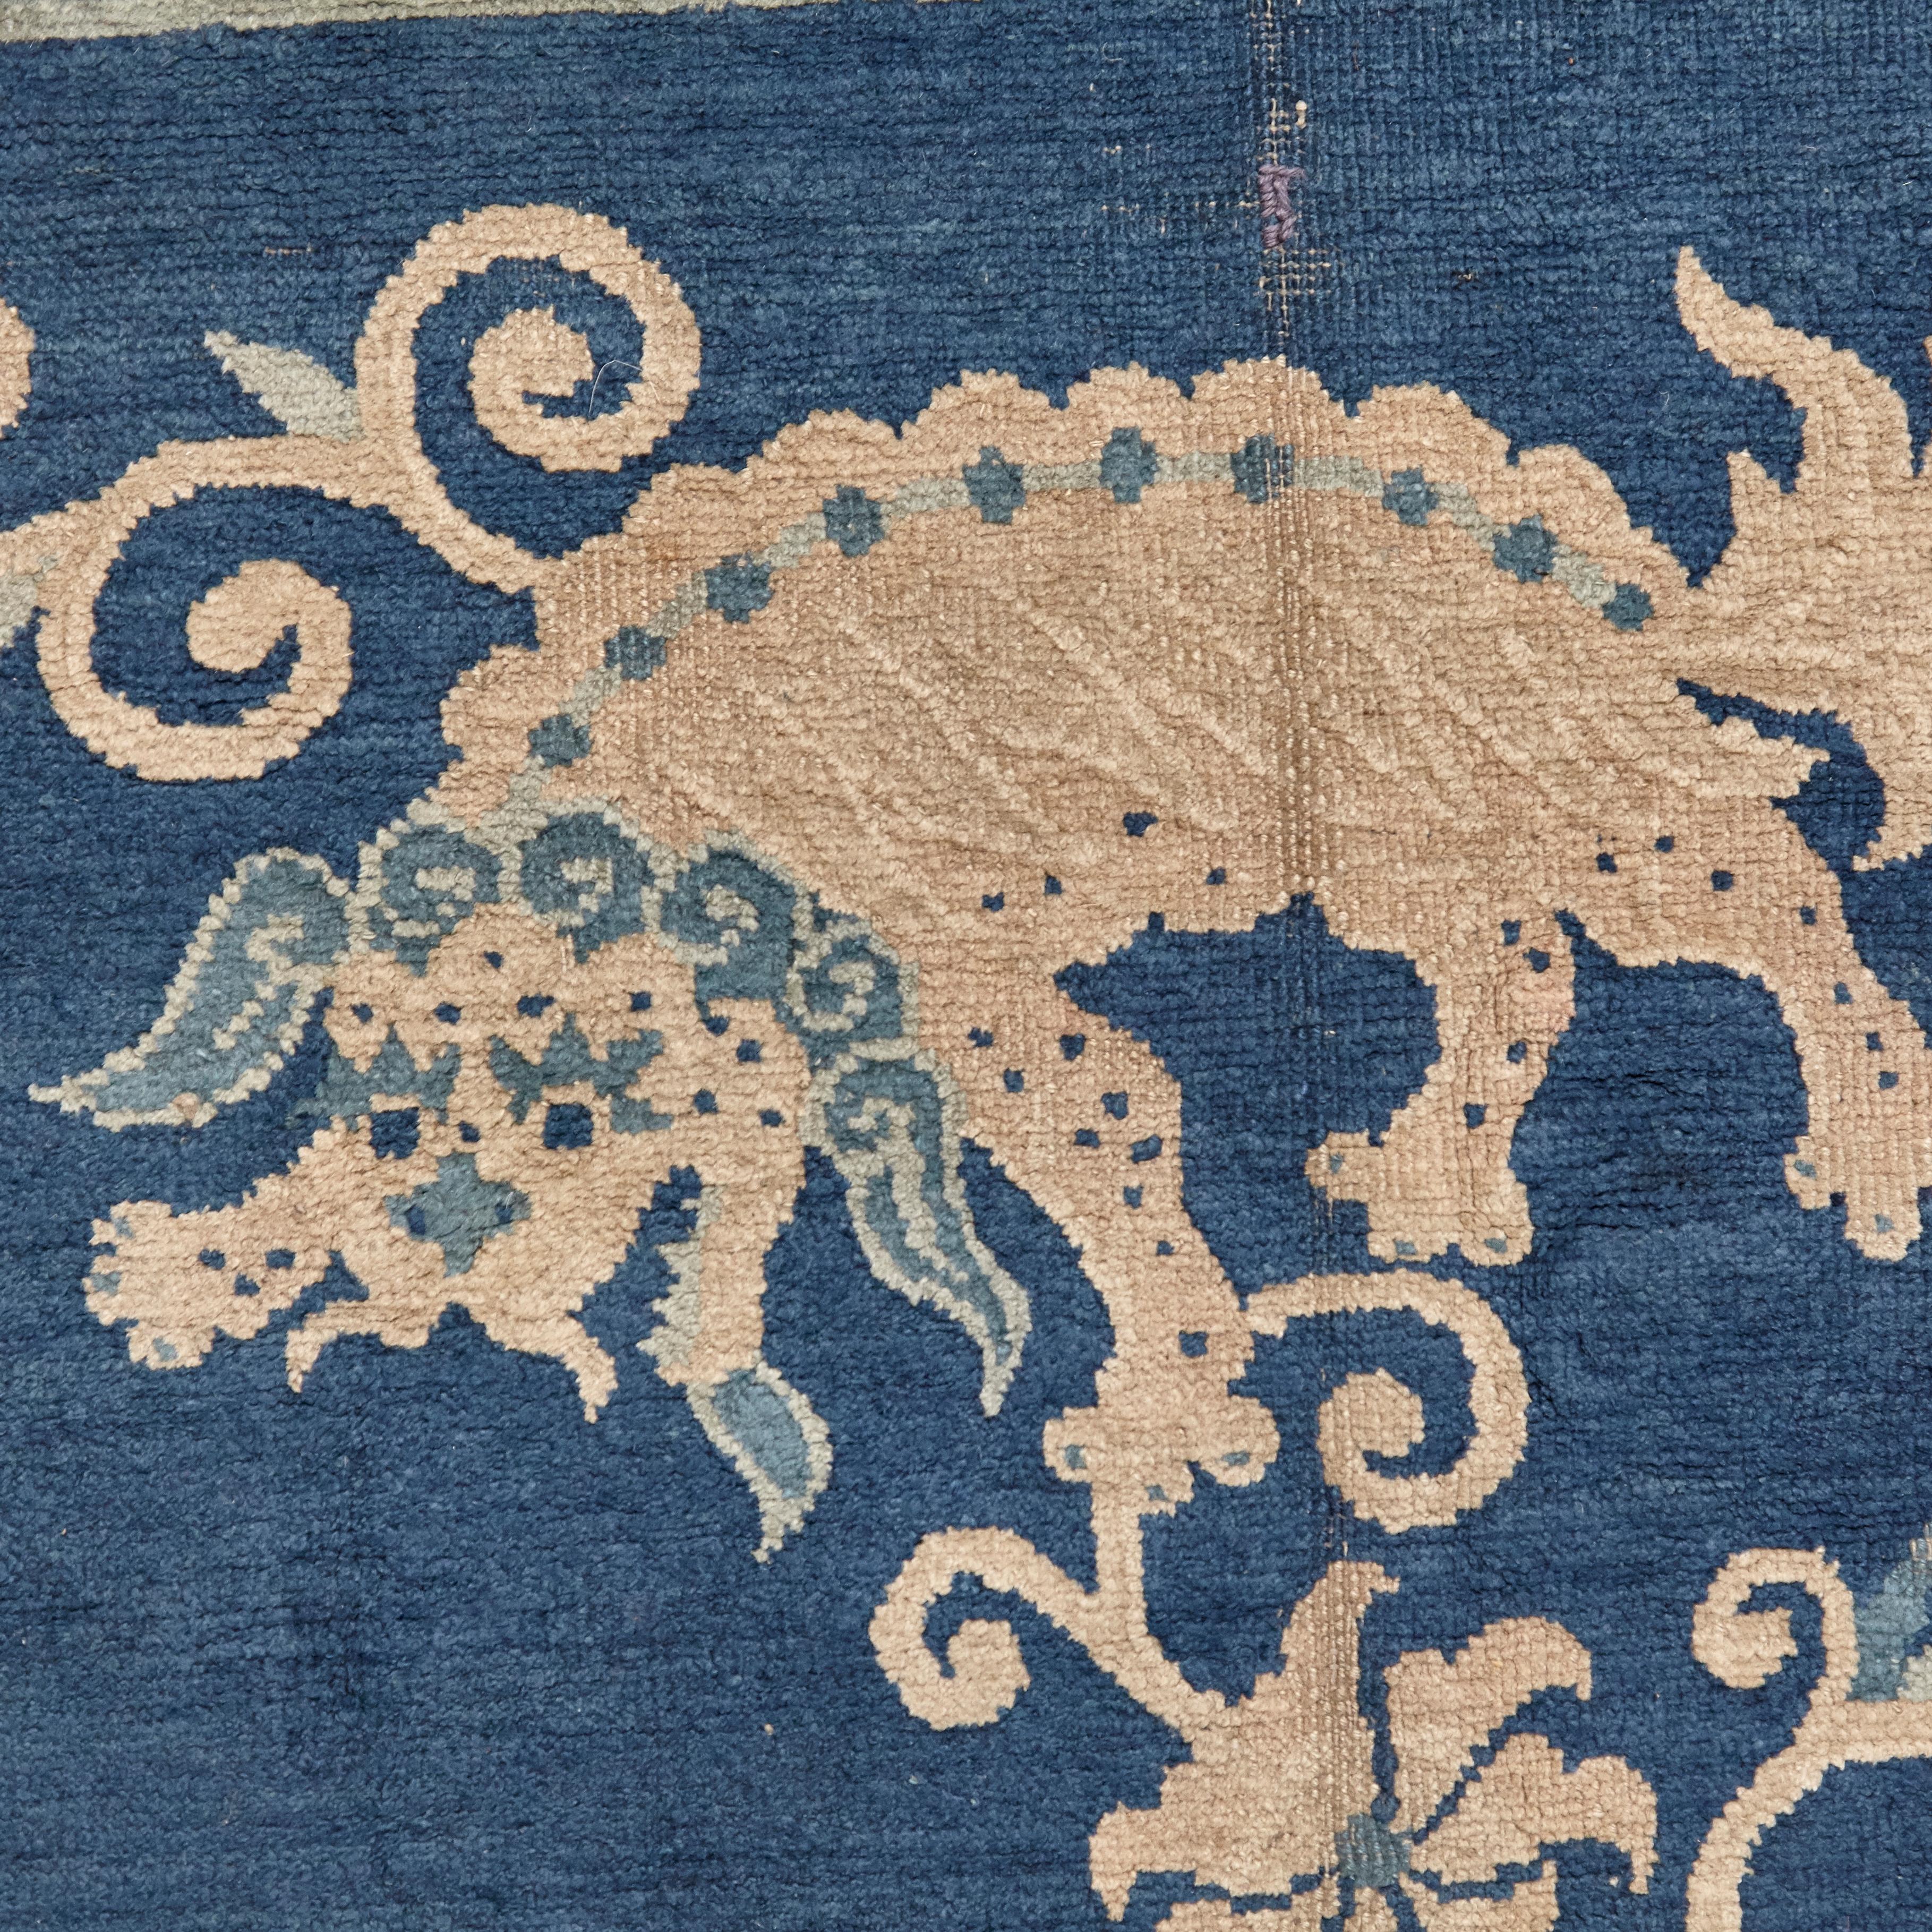 Ningshia, Chinese Export, Hand Knotted Wool, Antique Rug, circa 1920 5